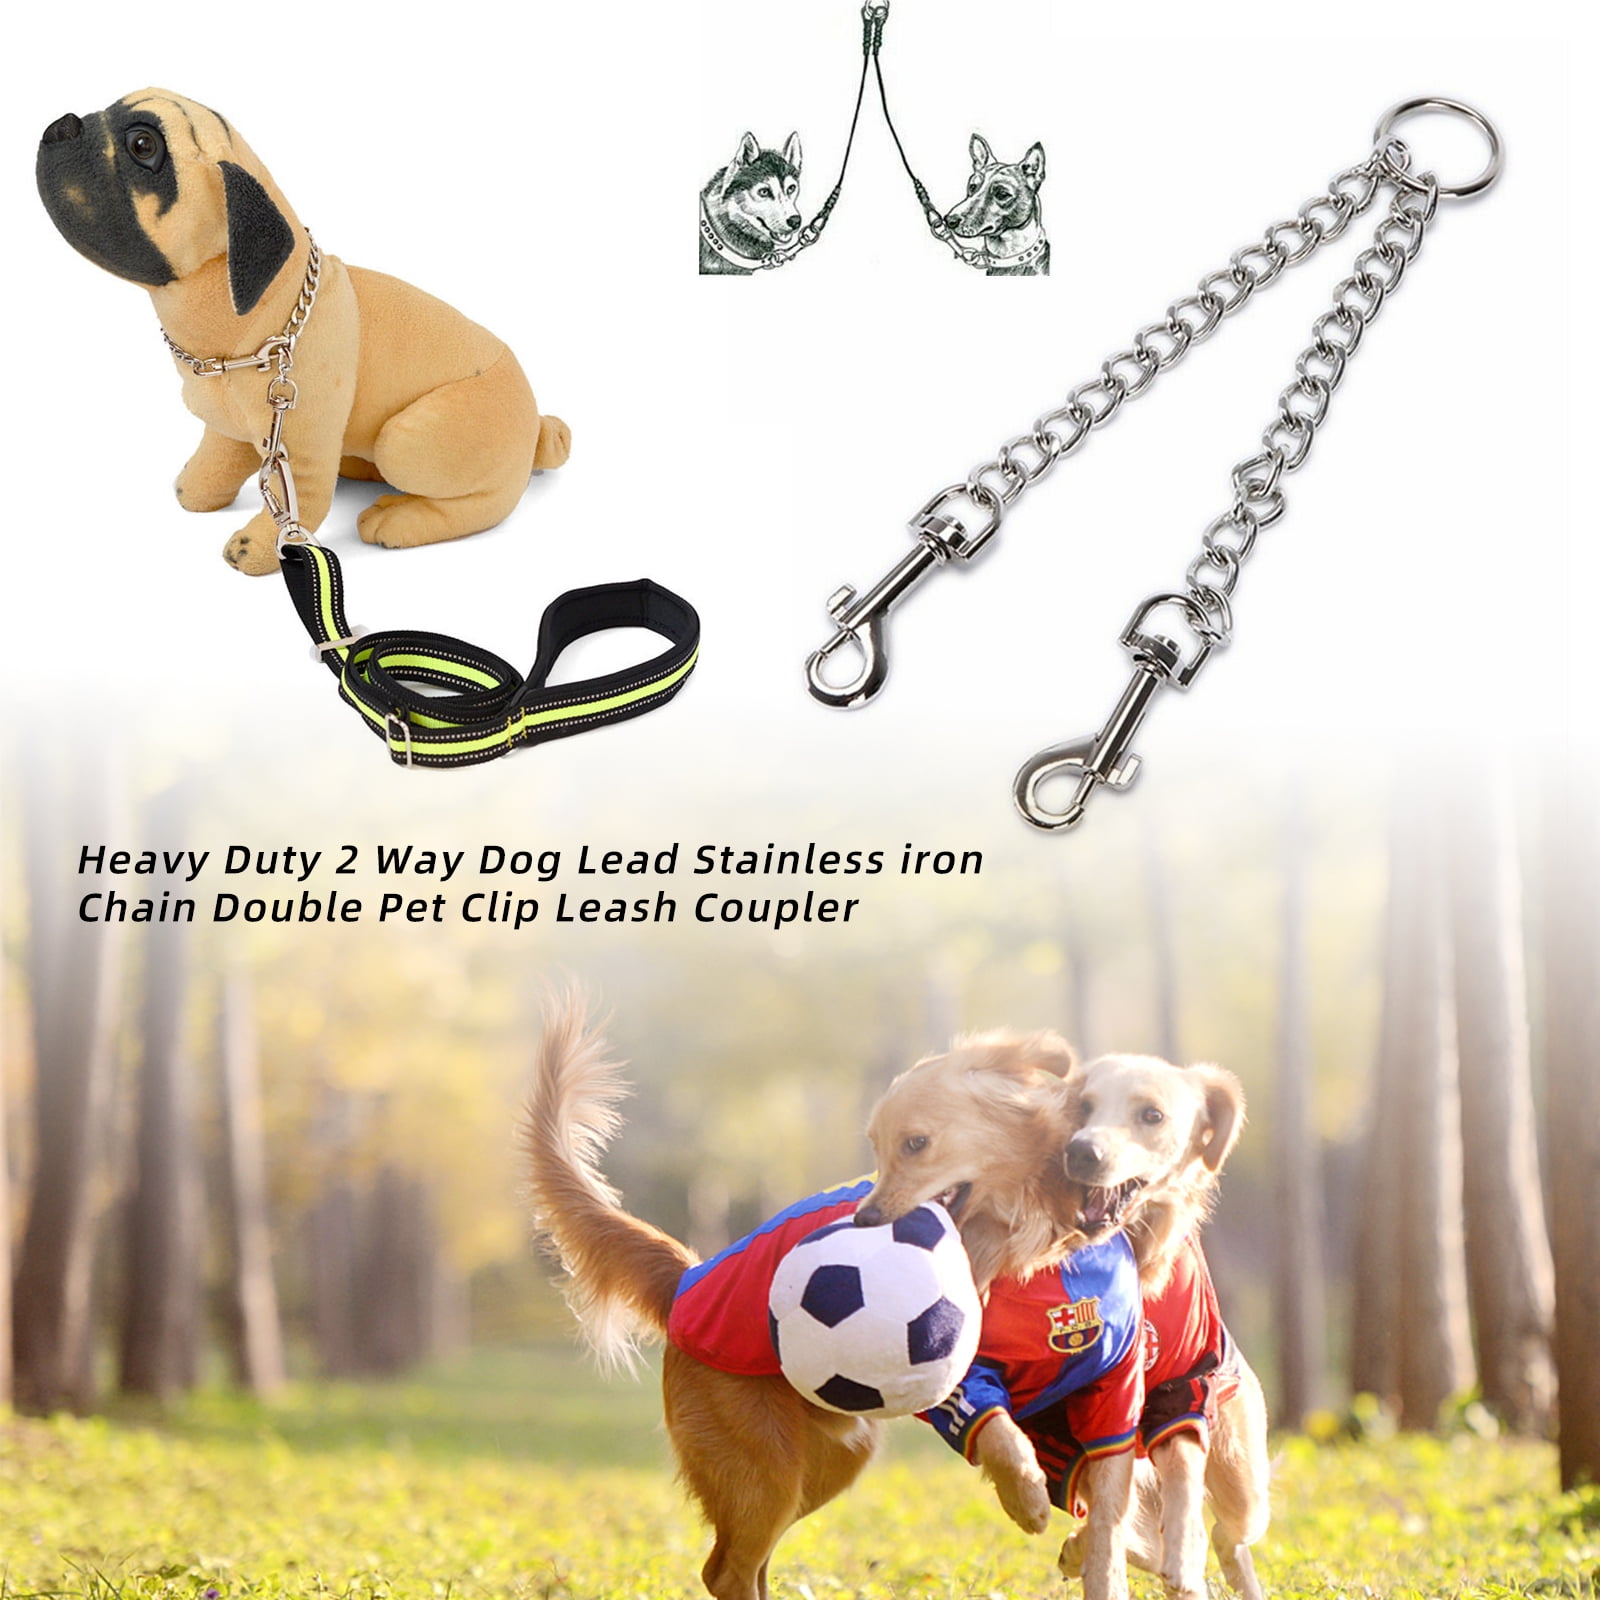 Black Bunty Double Dog Pet Lead Leash Splitter Coupler with Clip for Collar Harness